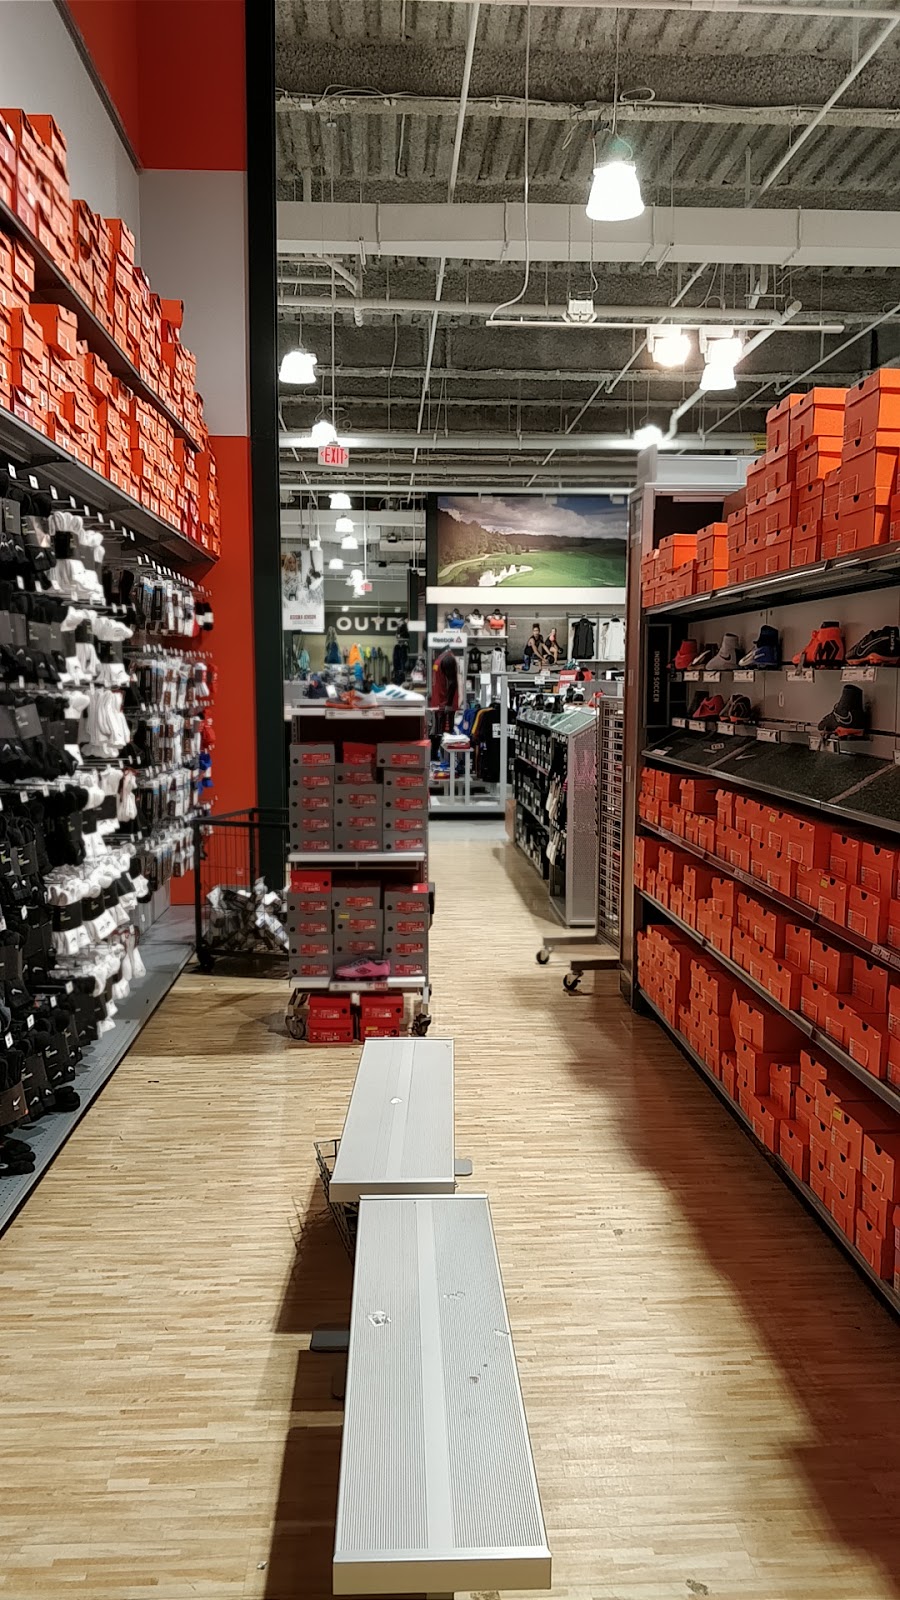 DICKS Sporting Goods | 45 Fitzgerald Street, Yonkers, NY 10710 | Phone: (914) 964-0580